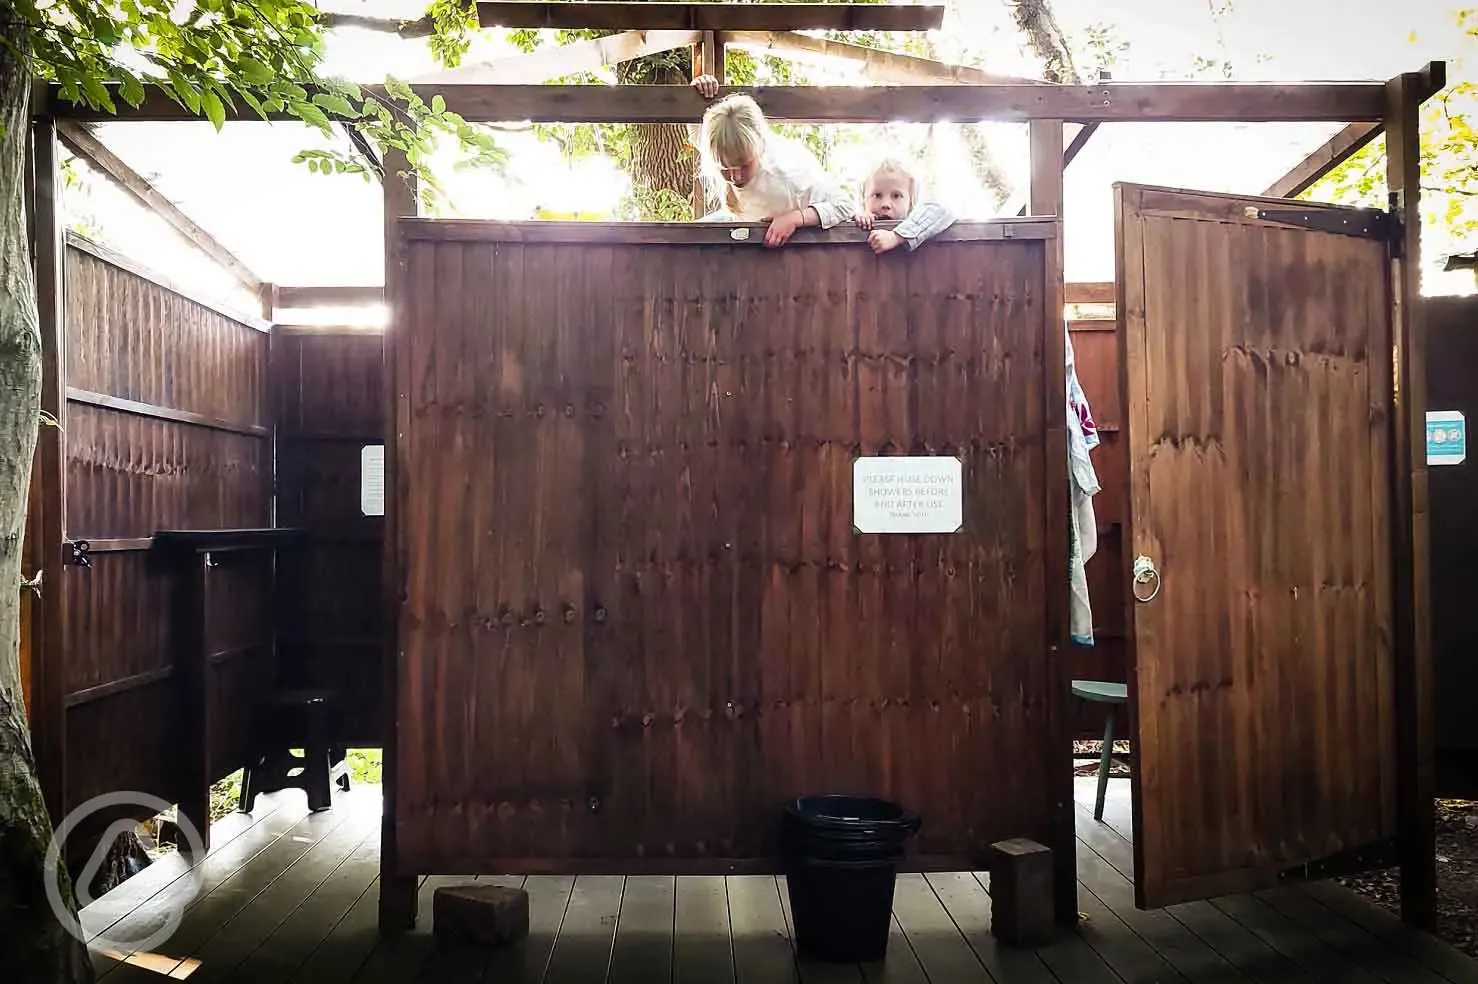 Children playing in the bucket showers